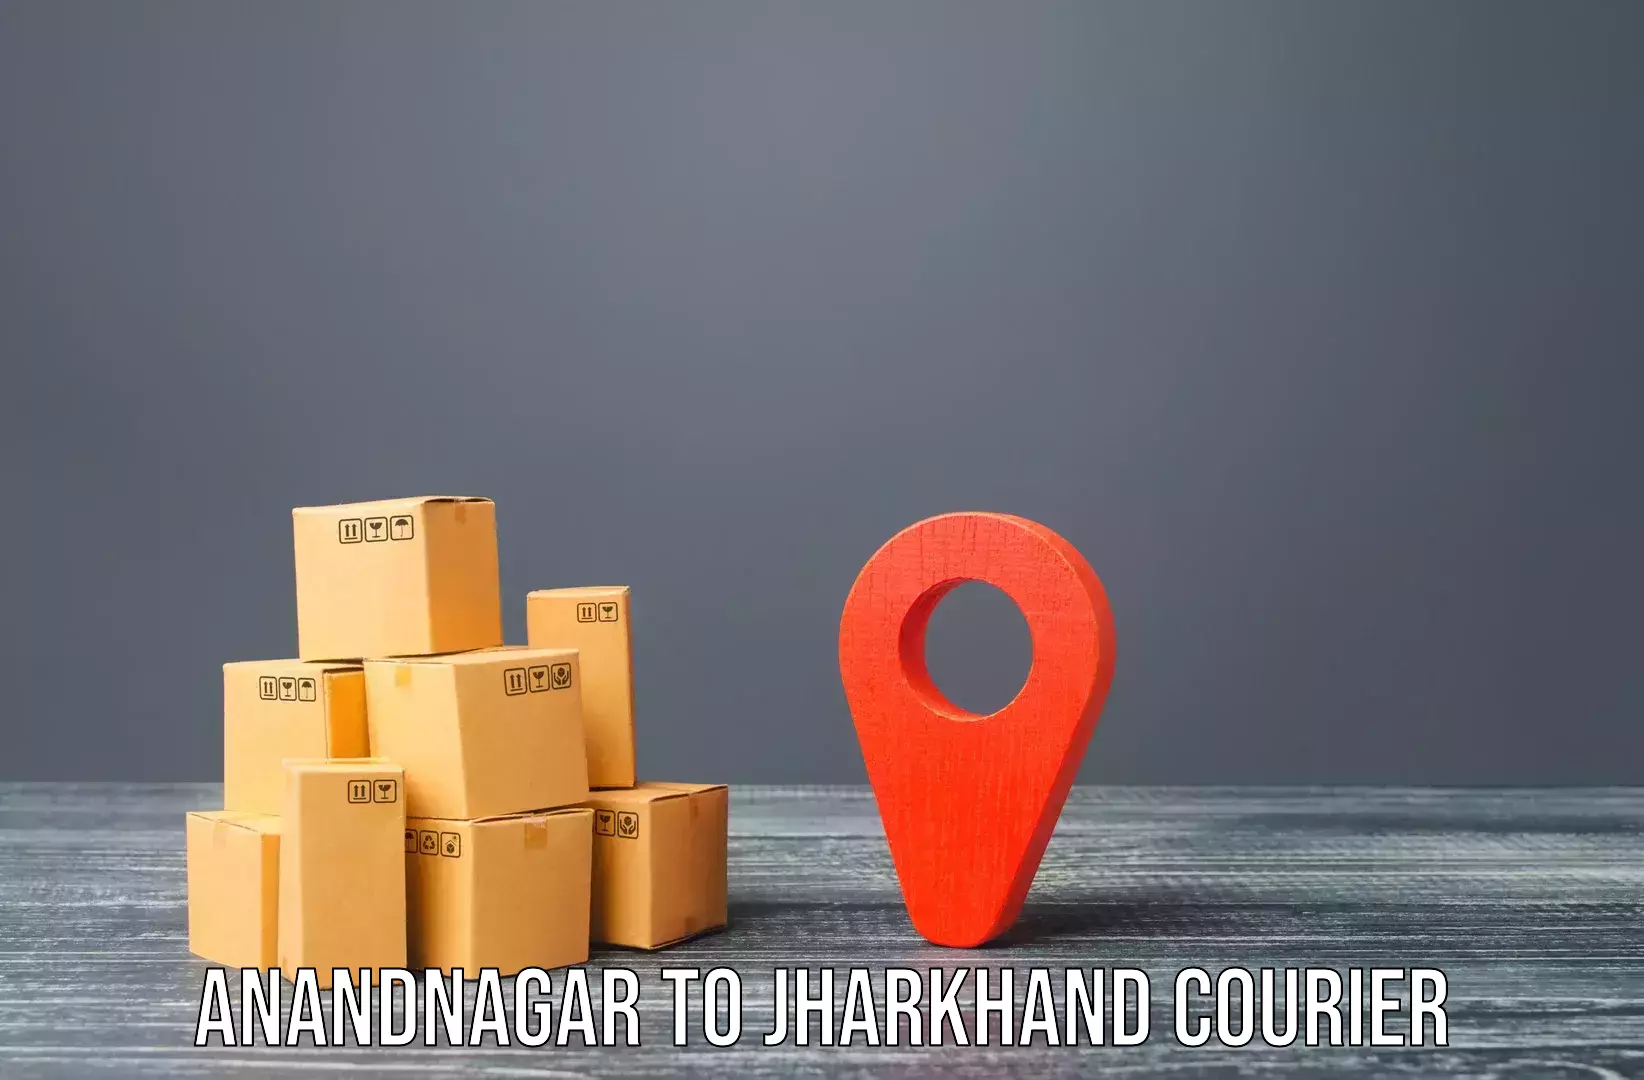 Quality relocation services in Anandnagar to Dhanbad